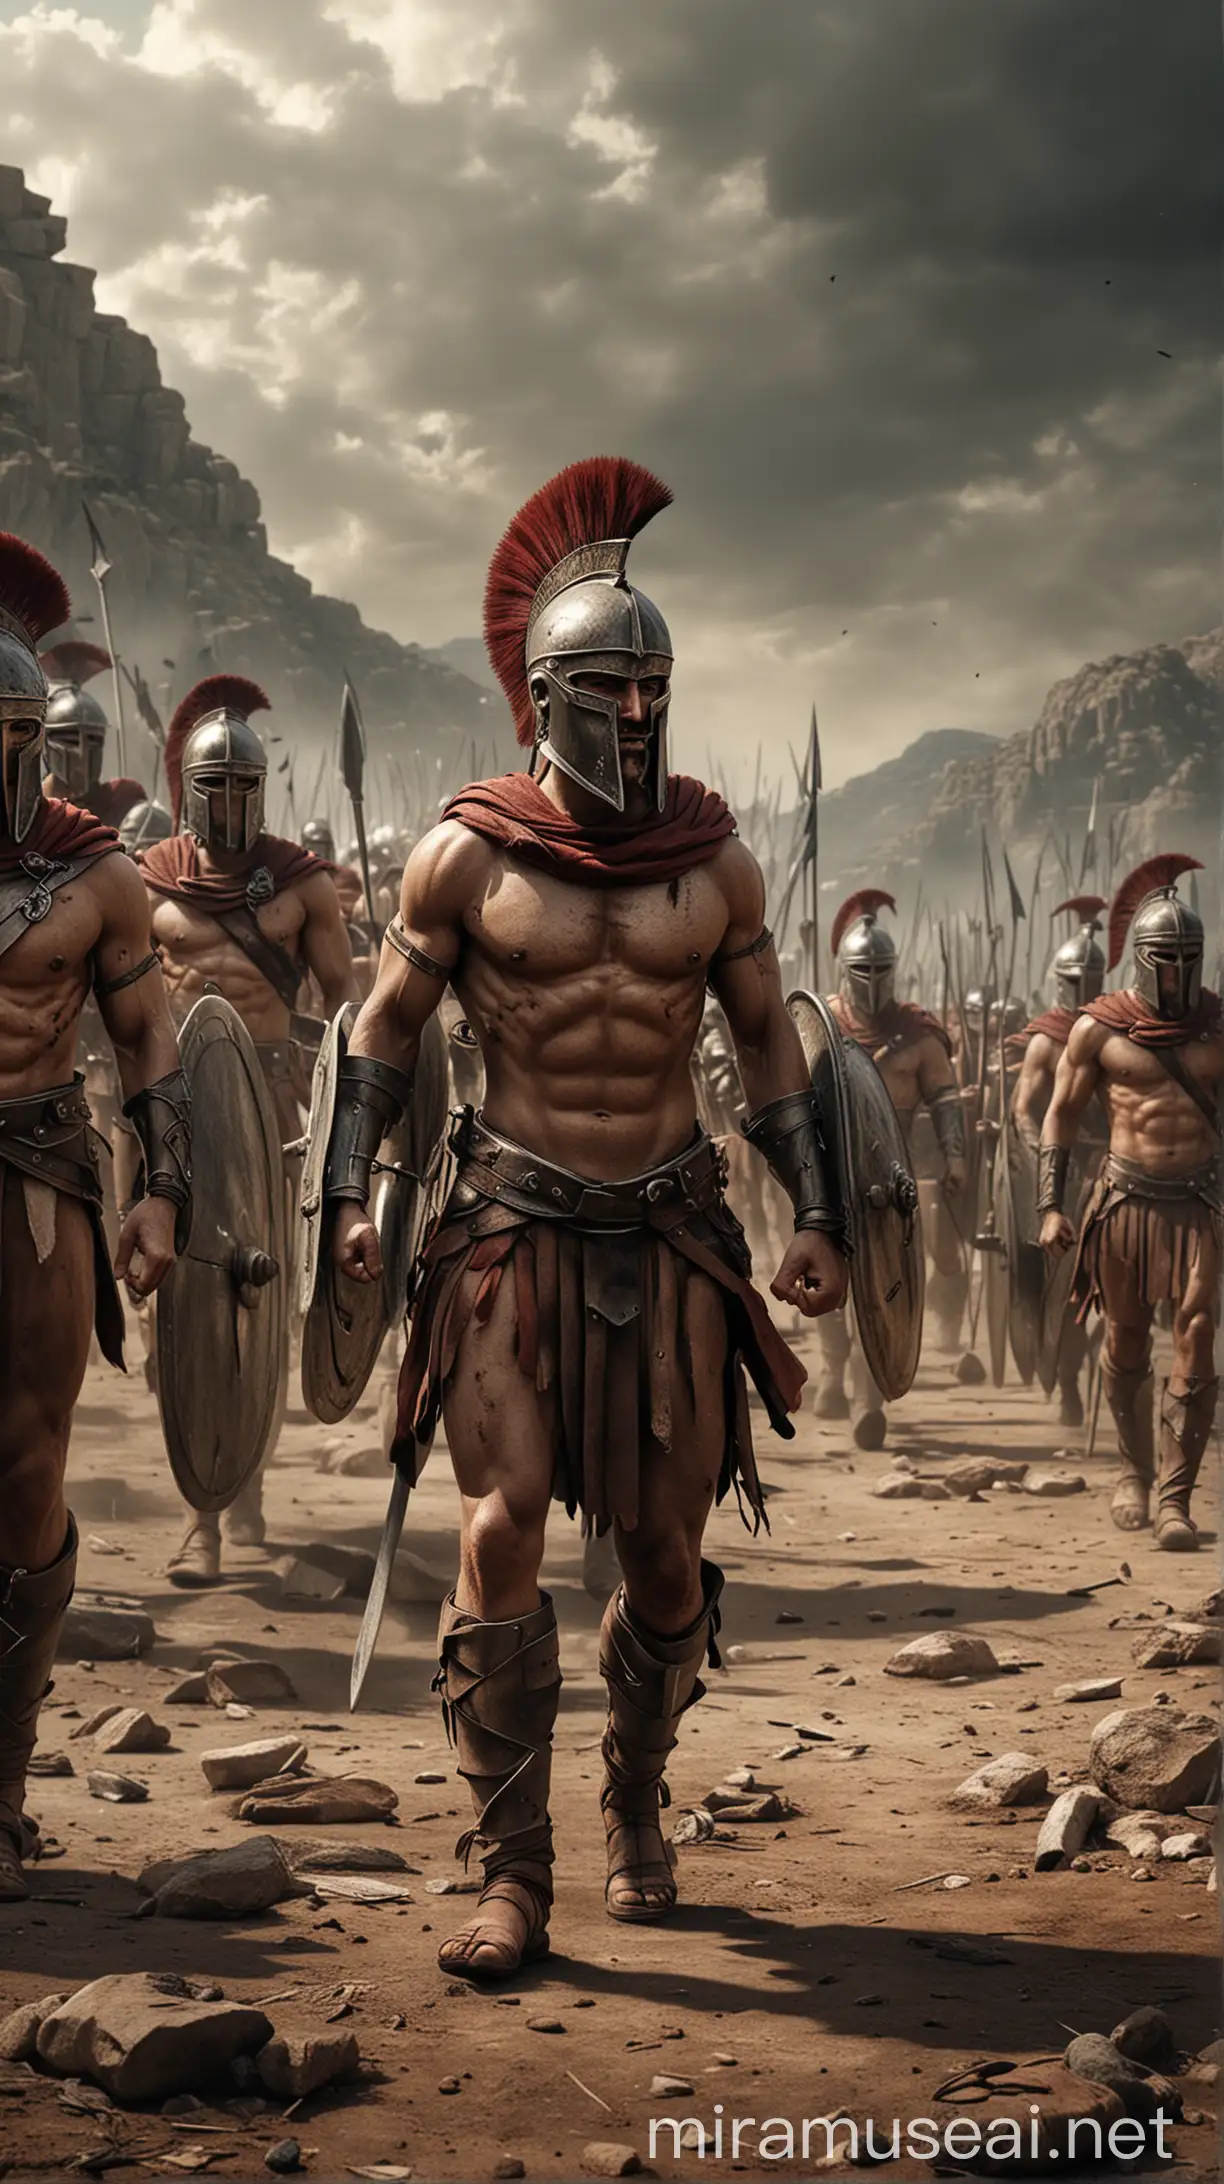 Fearless Spartans Preparing for Battle in Hyper Realistic Style